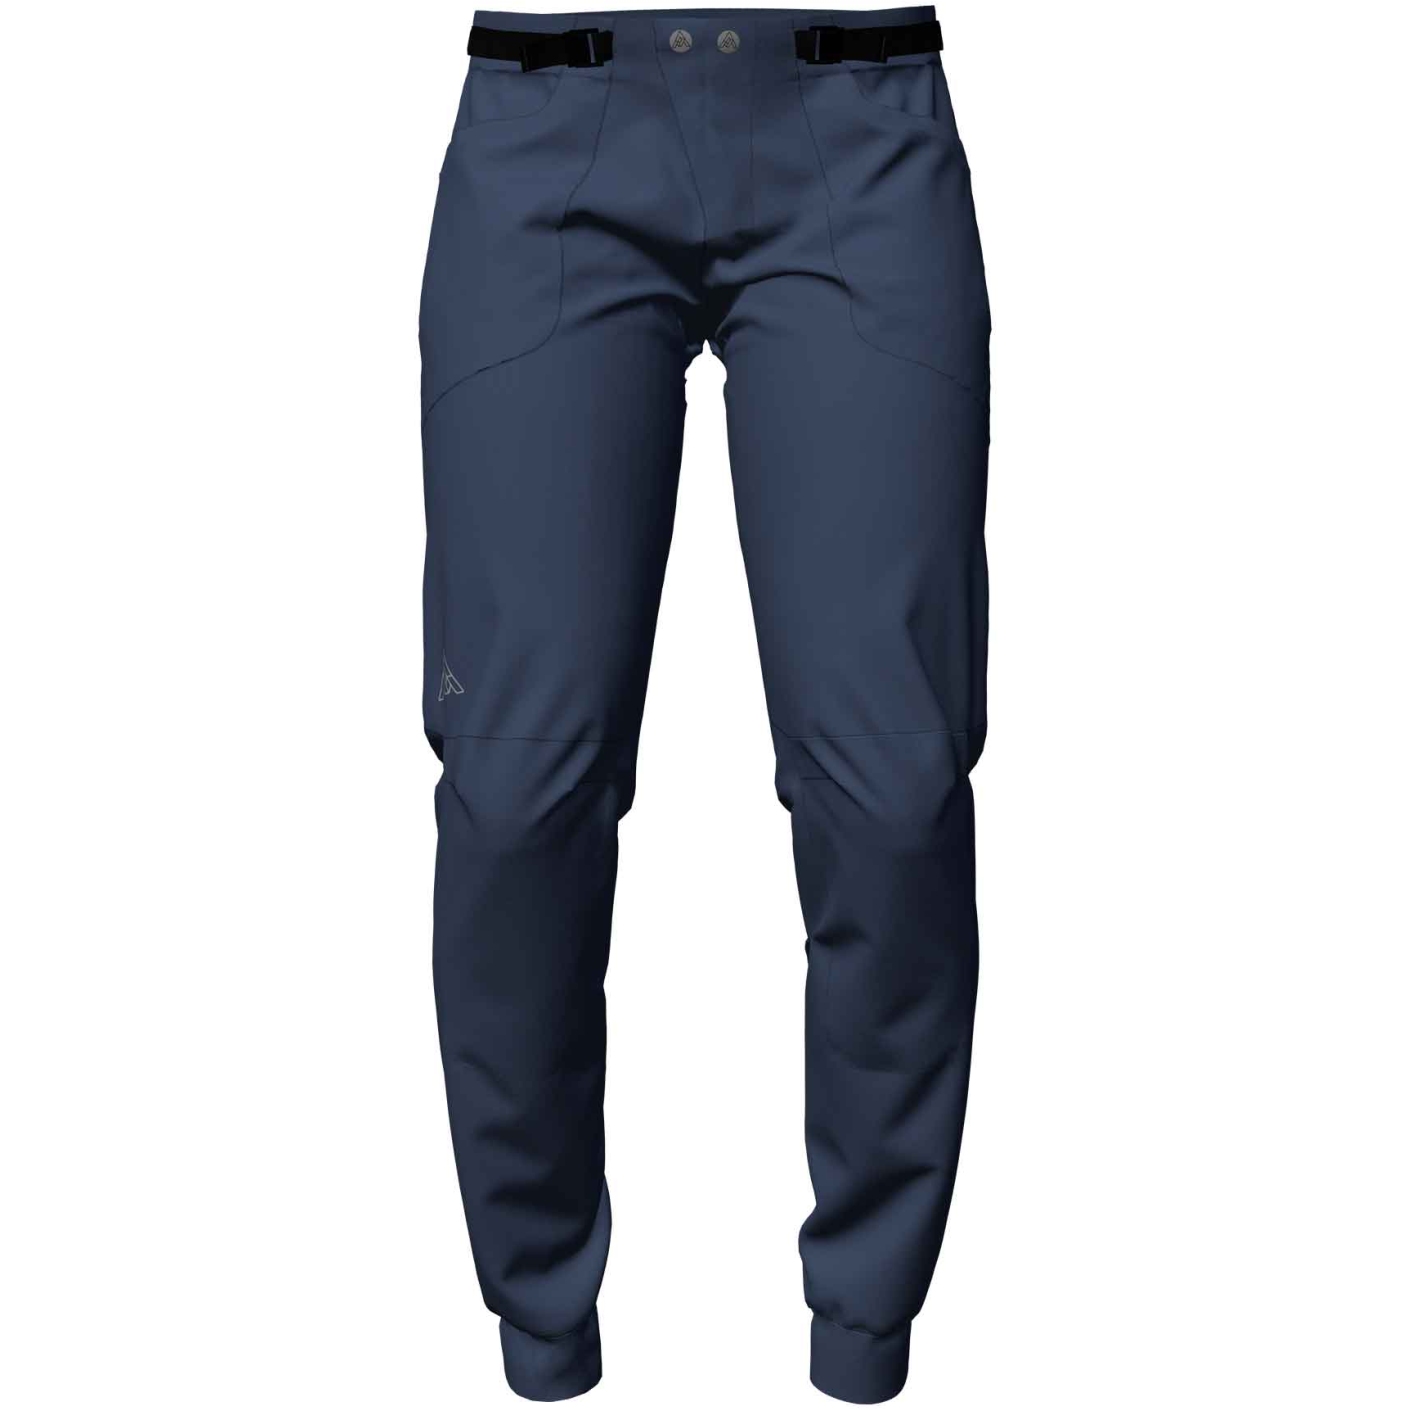 Picture of 7mesh Glidepath Pants Men - Midnight Blue